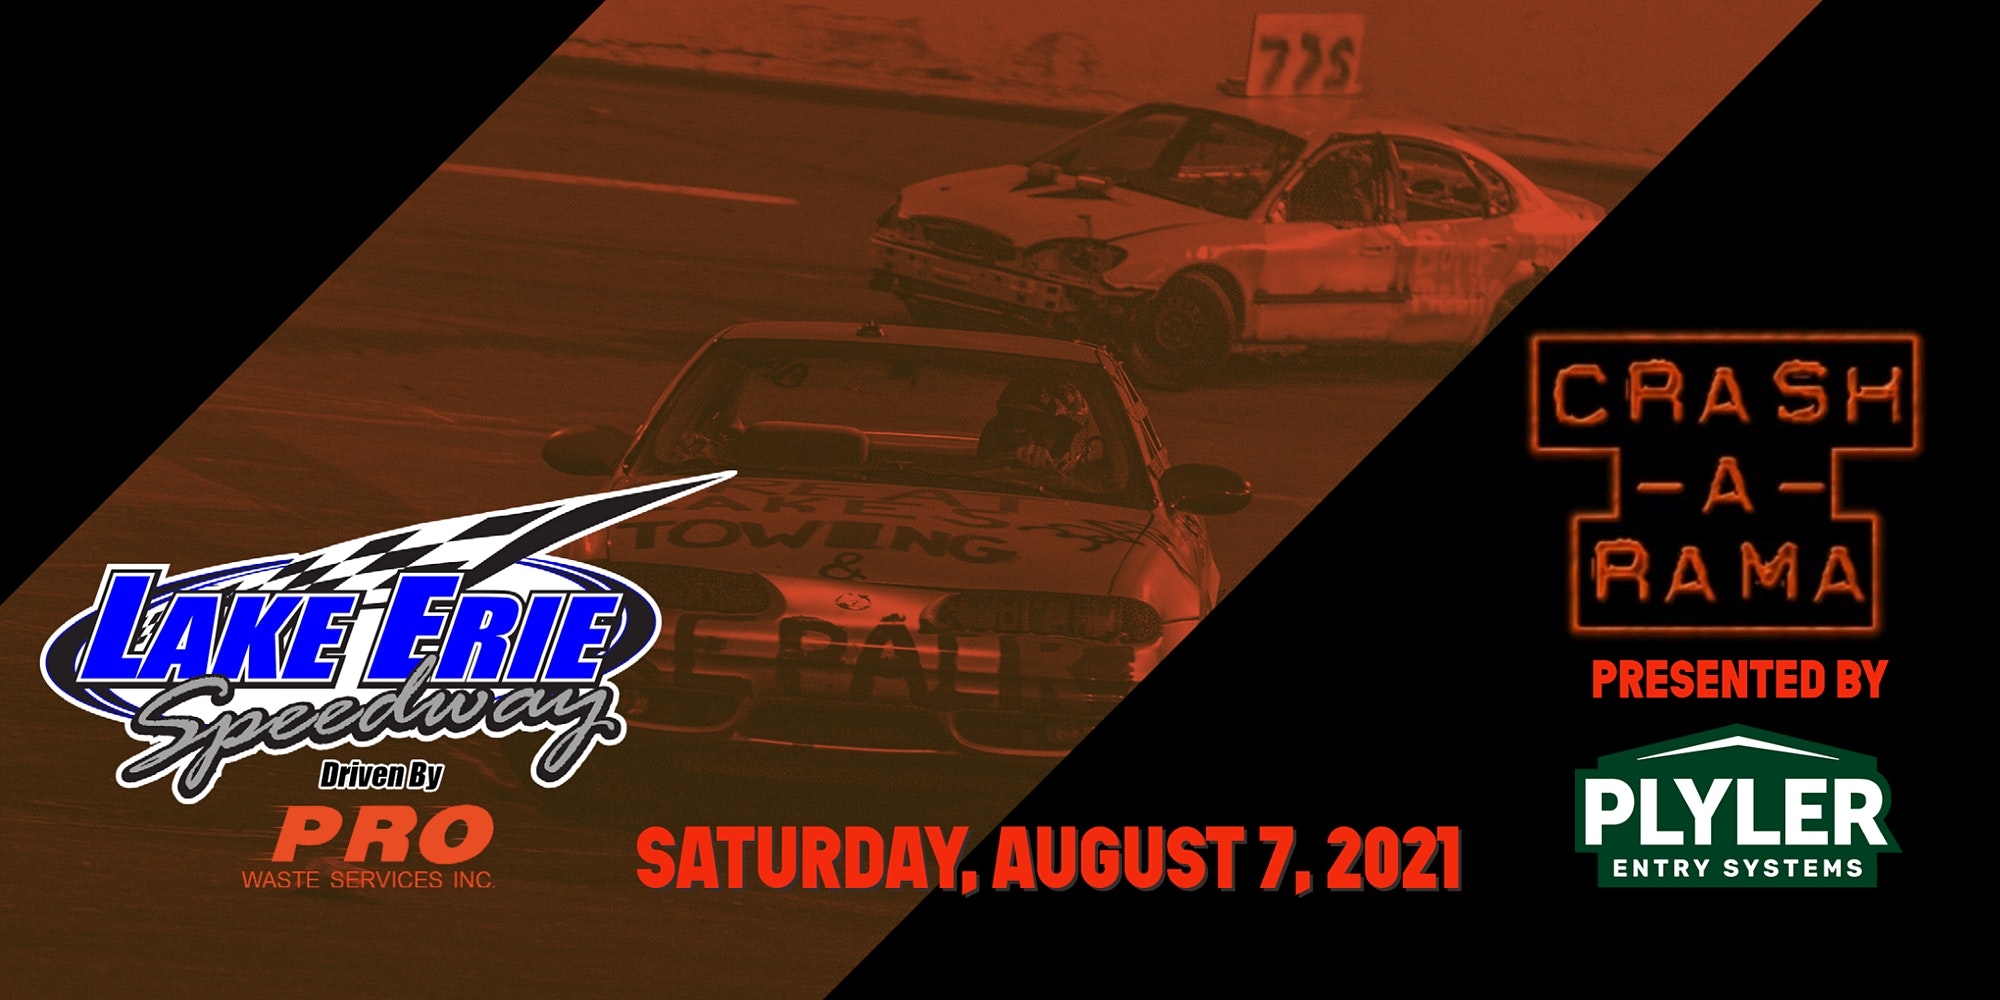 Crash-A-Rama 2021 presented by Plyler Entry Systems